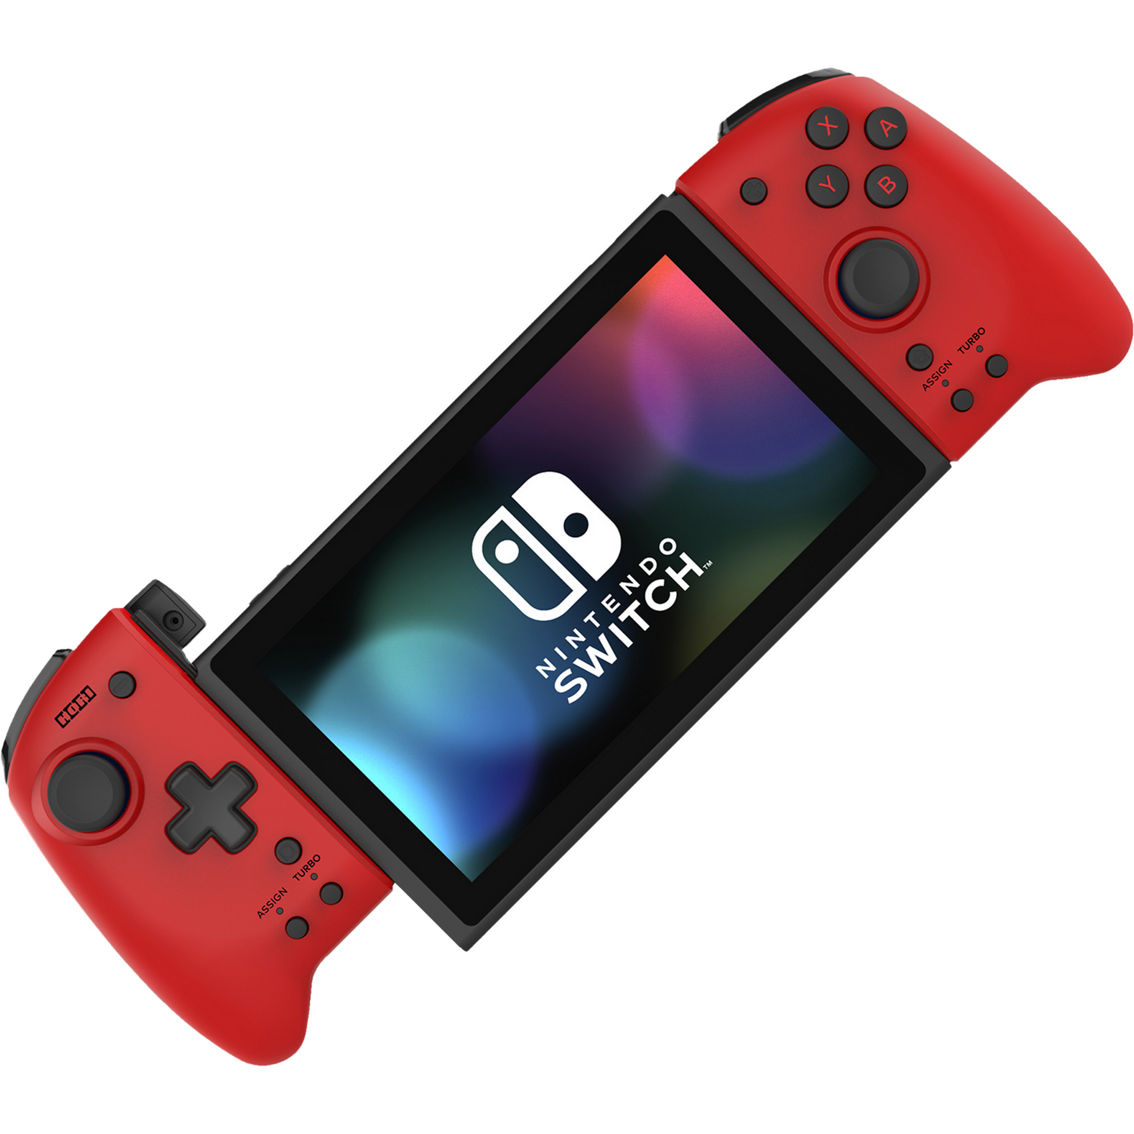 Hori Split Pad Pro Controller for Nintendo Switch - Image 5 of 5